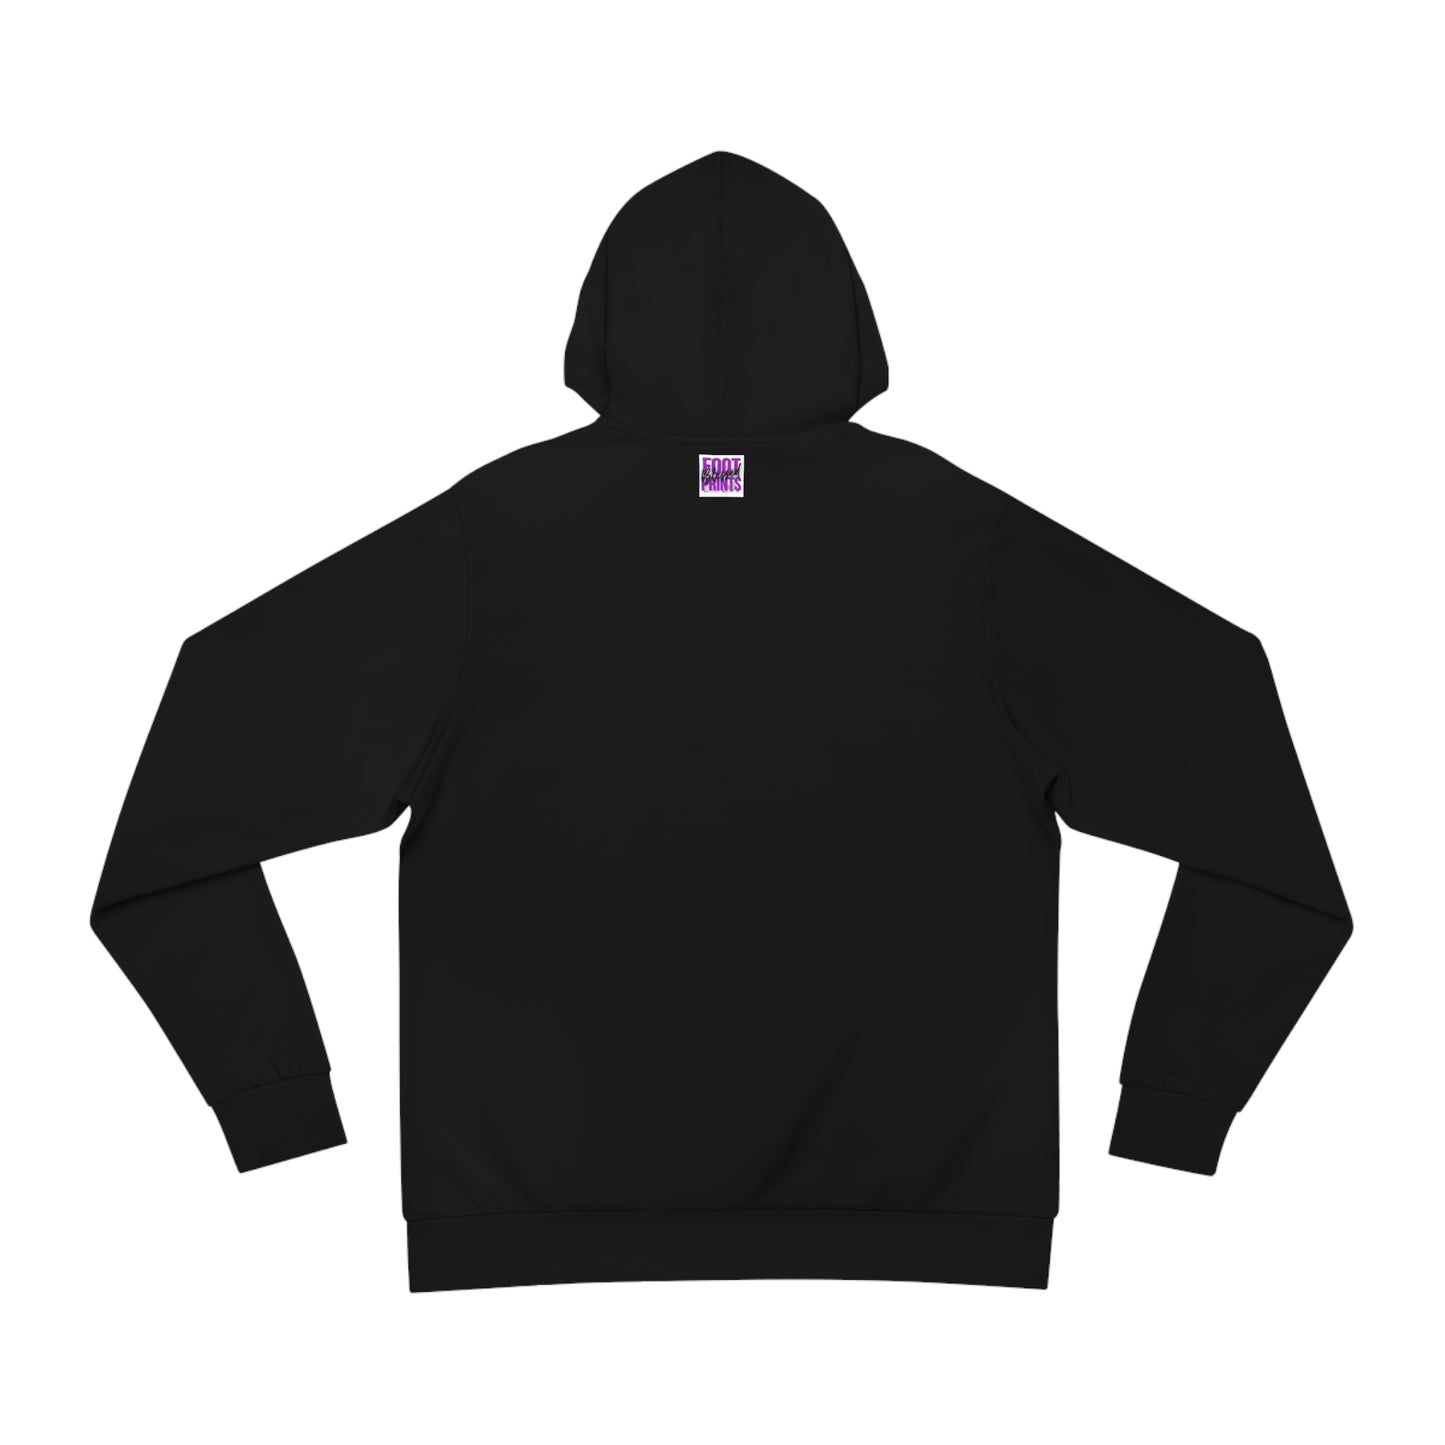 Blessed are they that mourn Fashion Hoodie